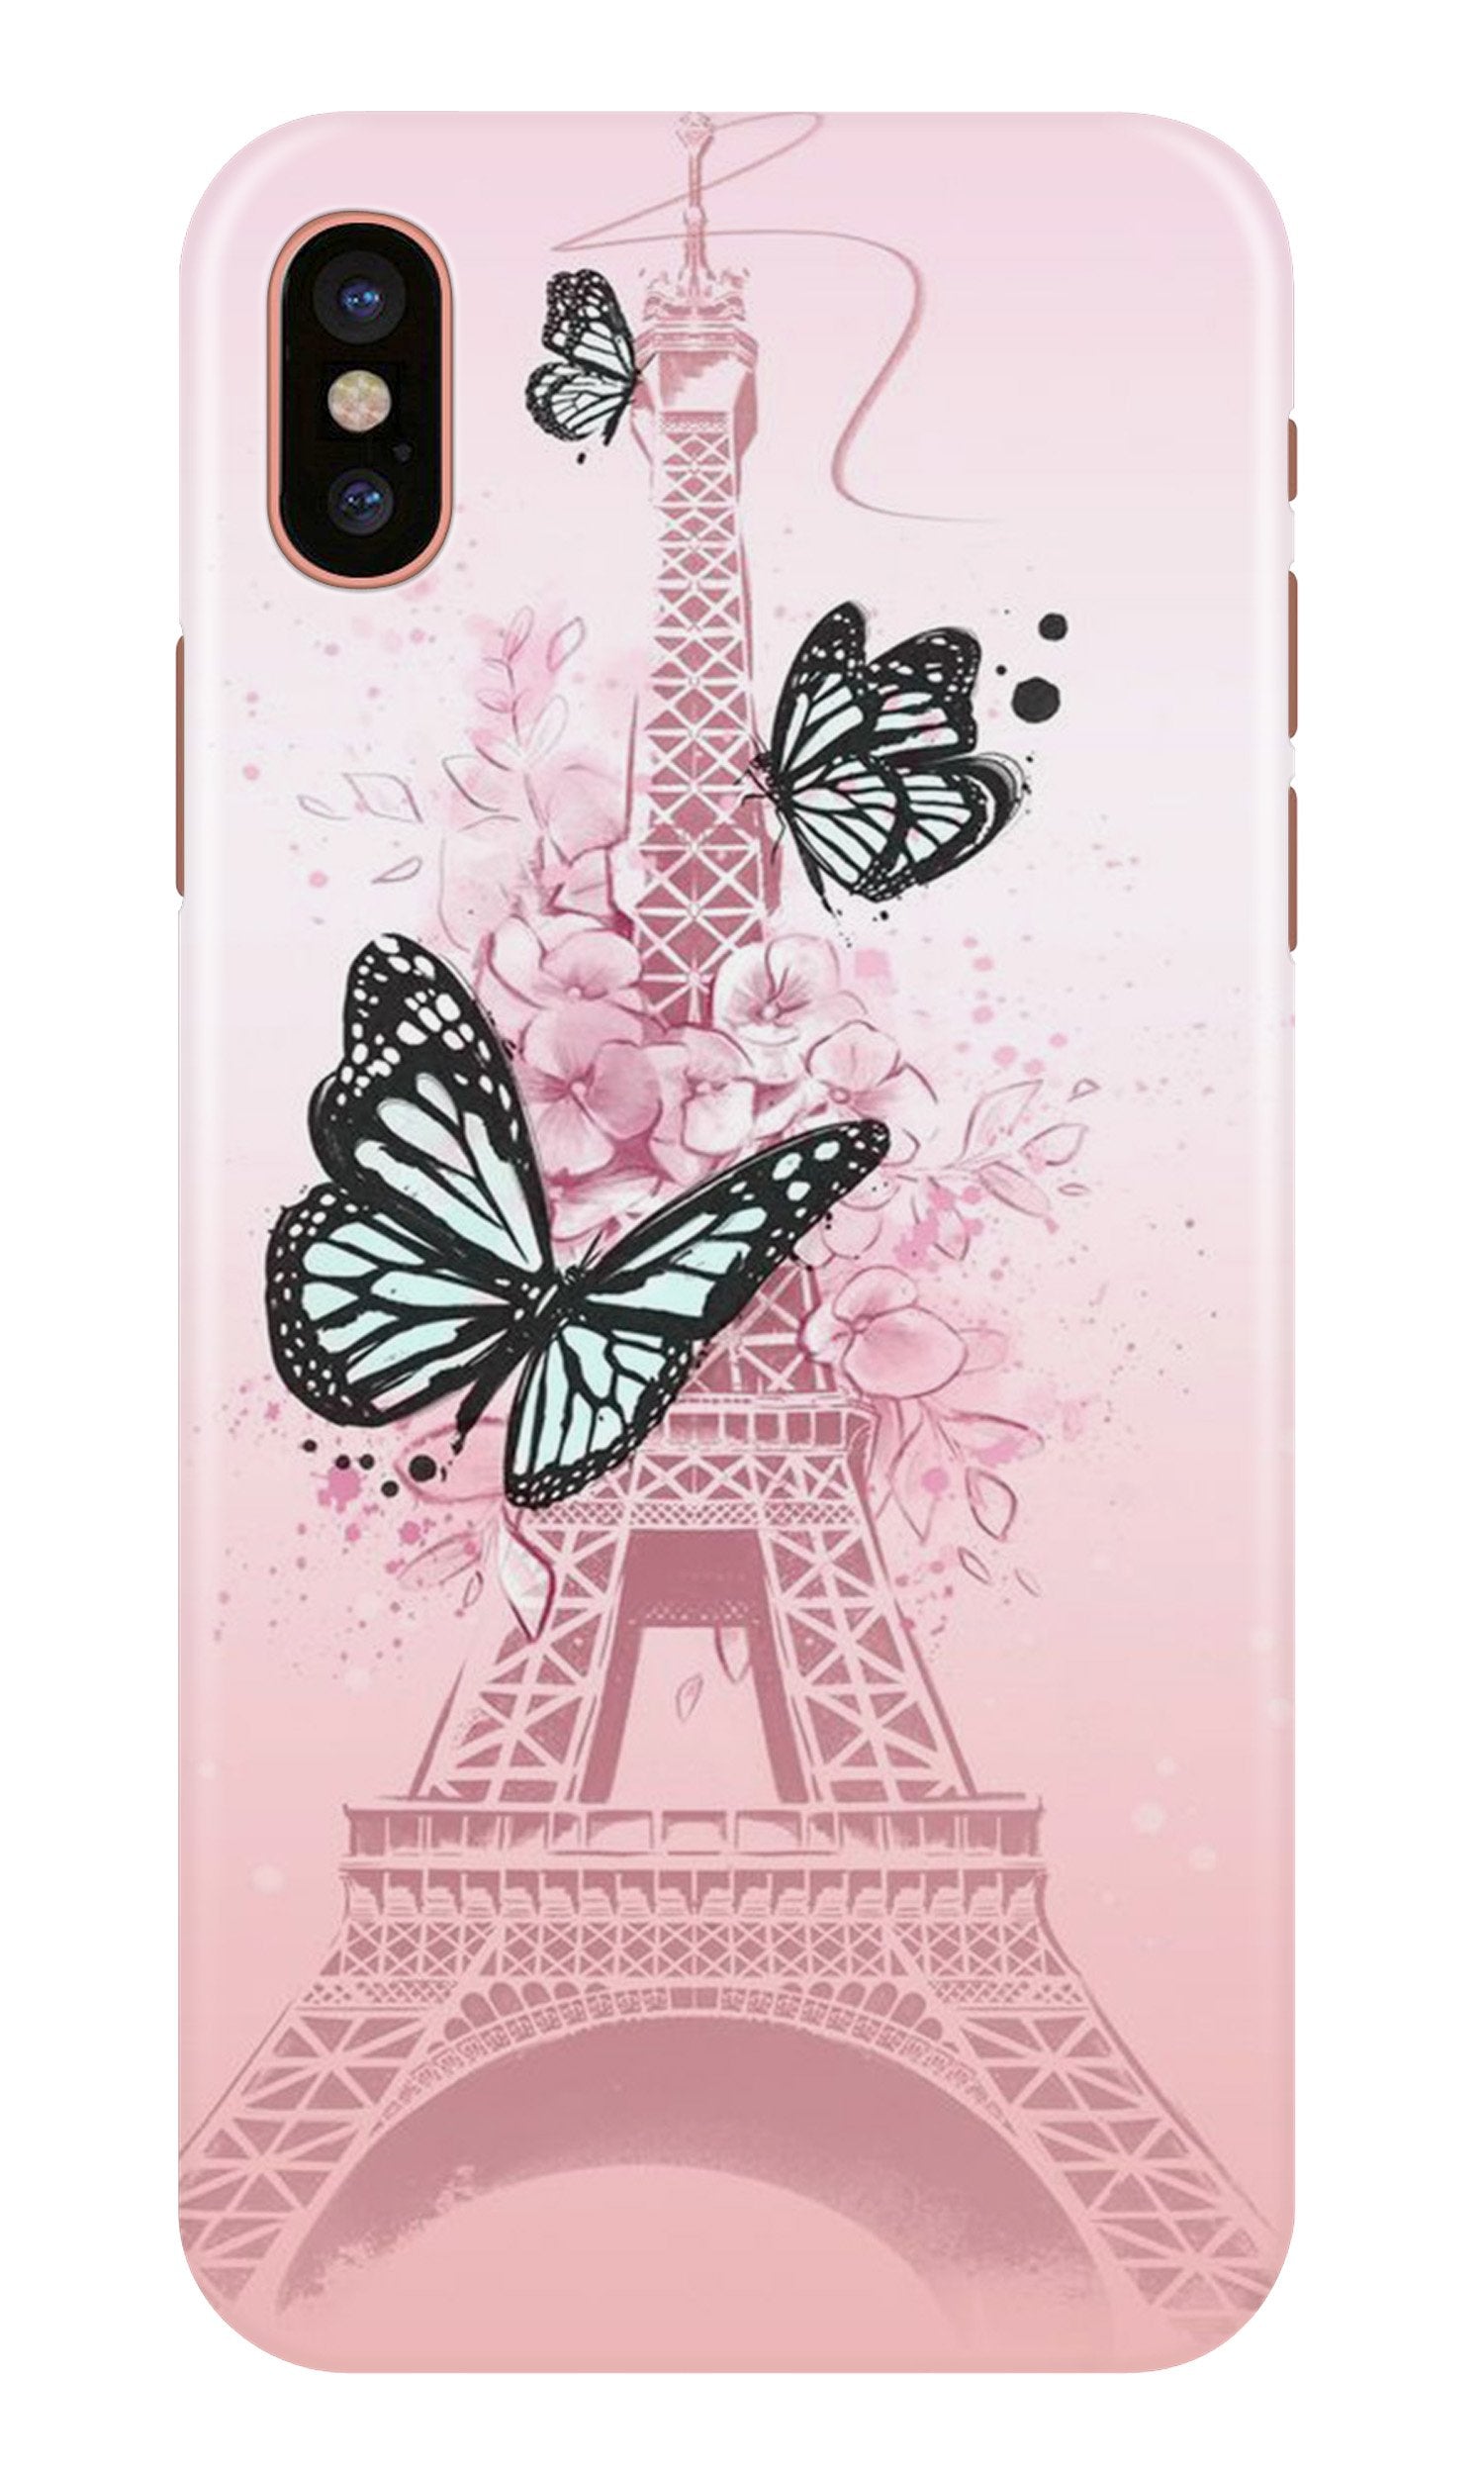 Eiffel Tower Case for iPhone X (Design No. 211)